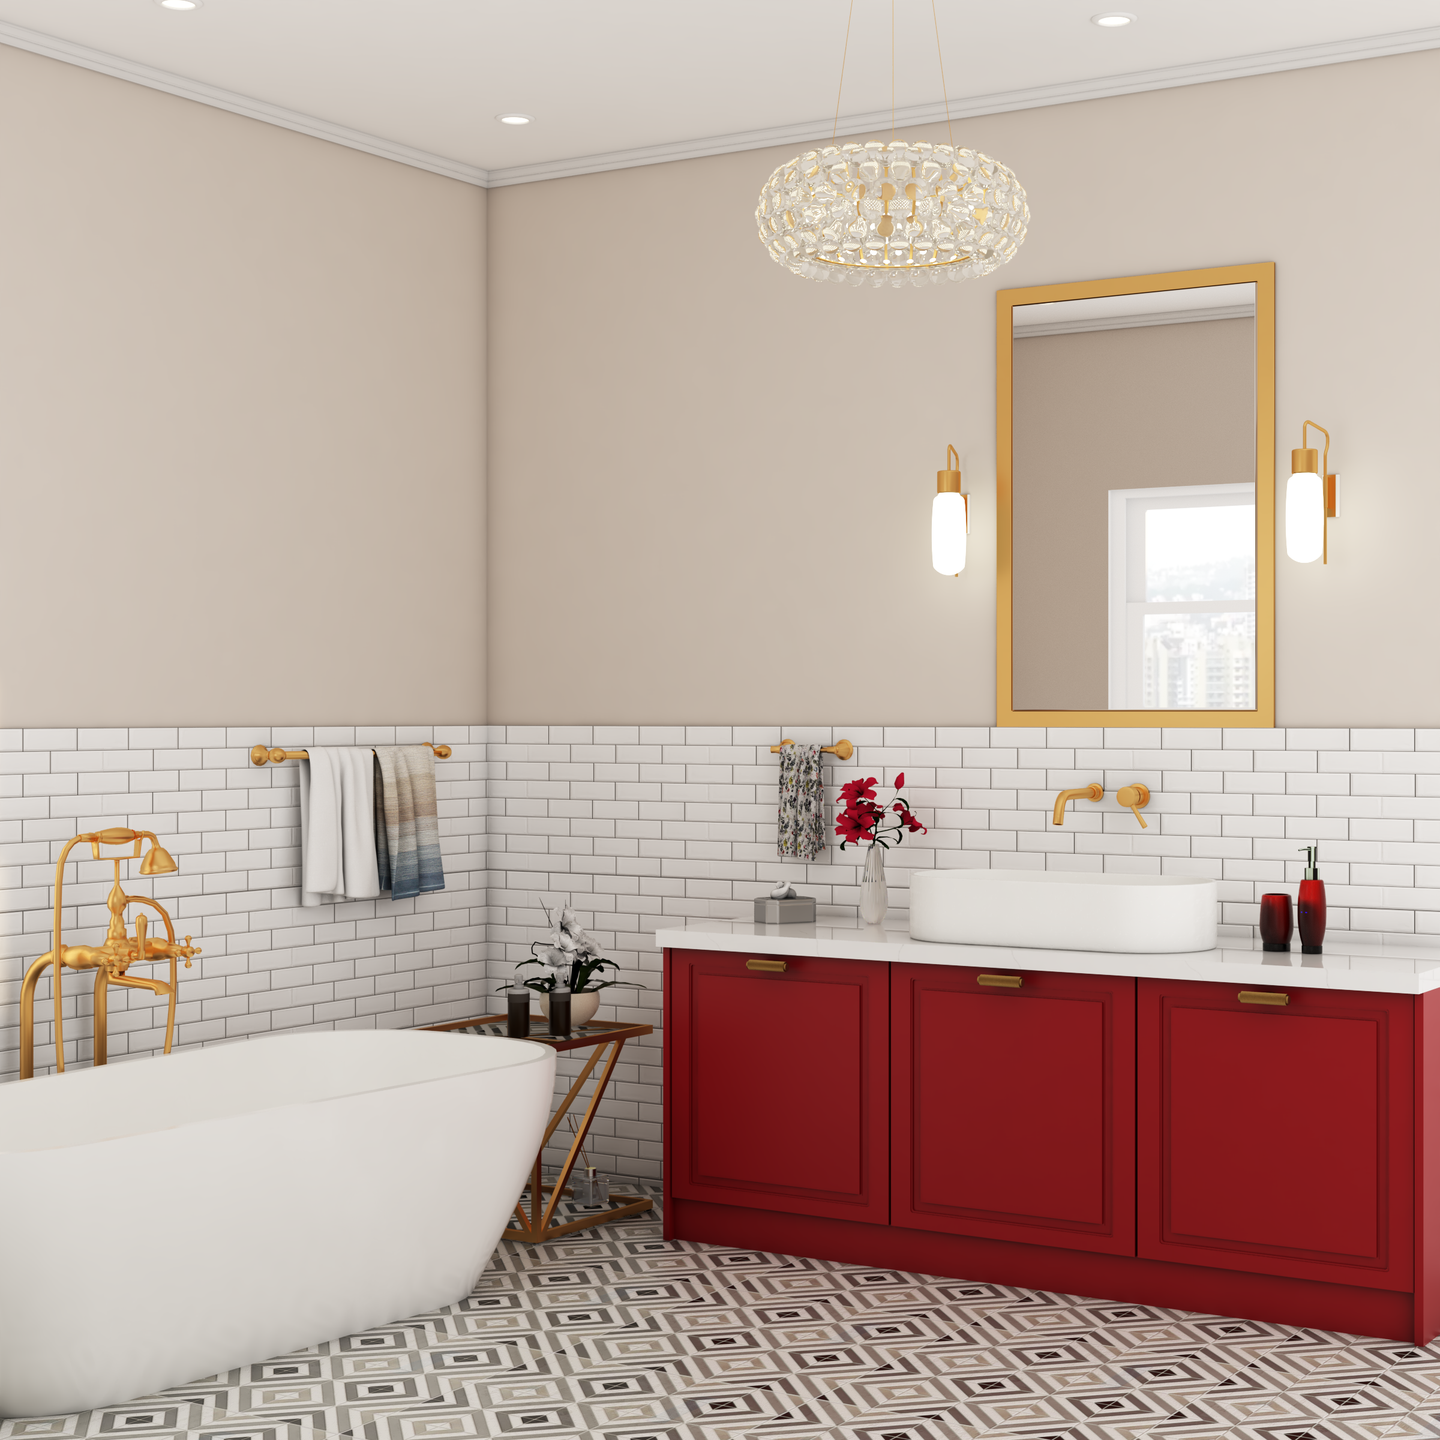 Bathroom With Red Cabinet - Livspace